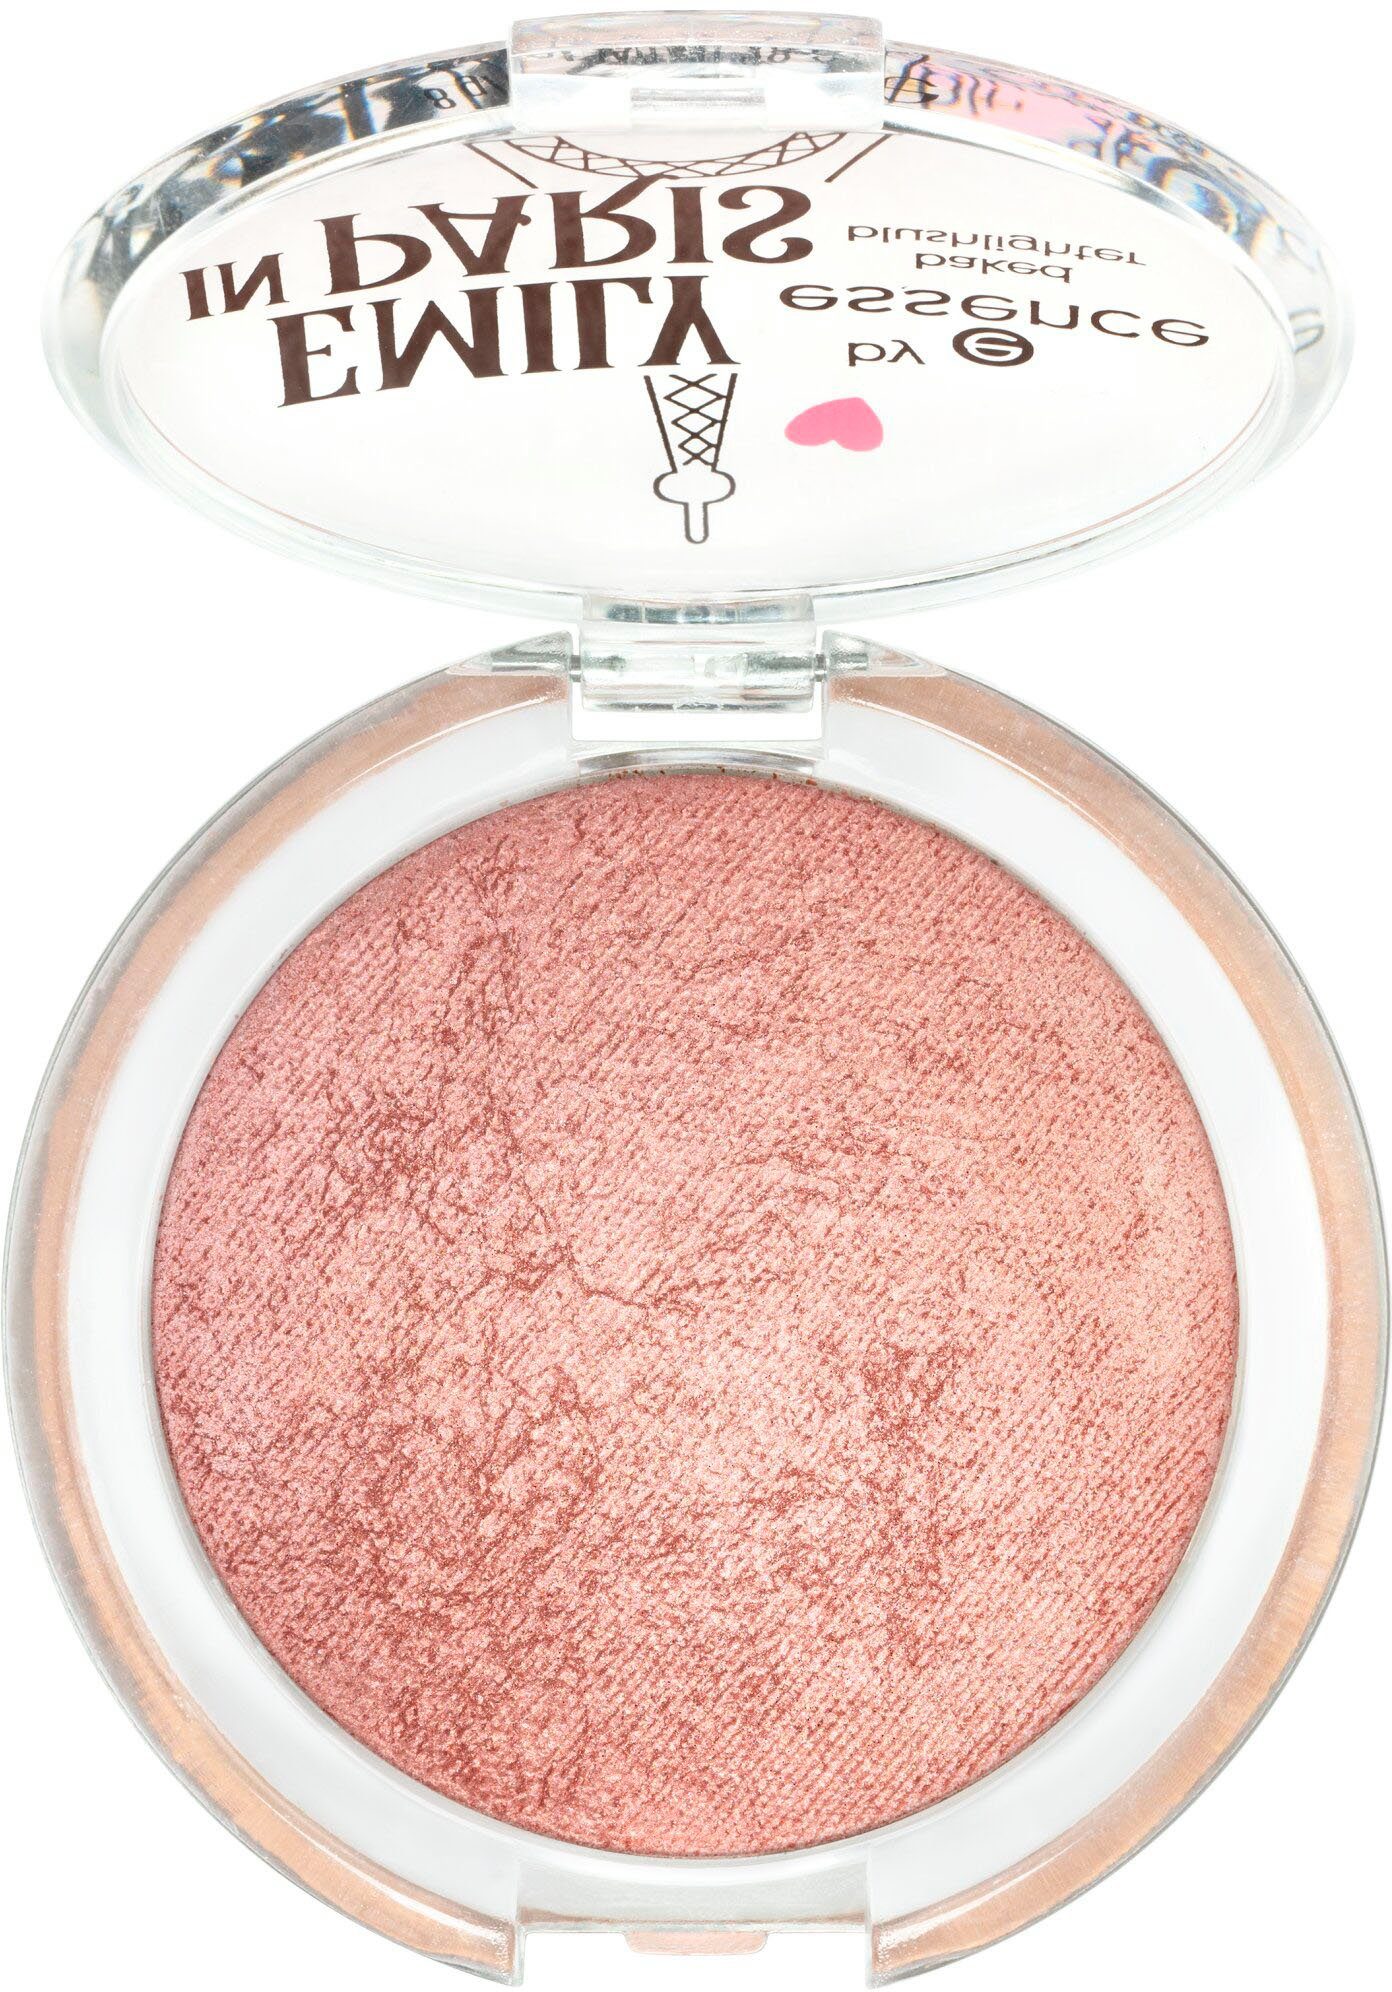 PARIS Essence Rouge EMILY blushlighter essence by baked IN